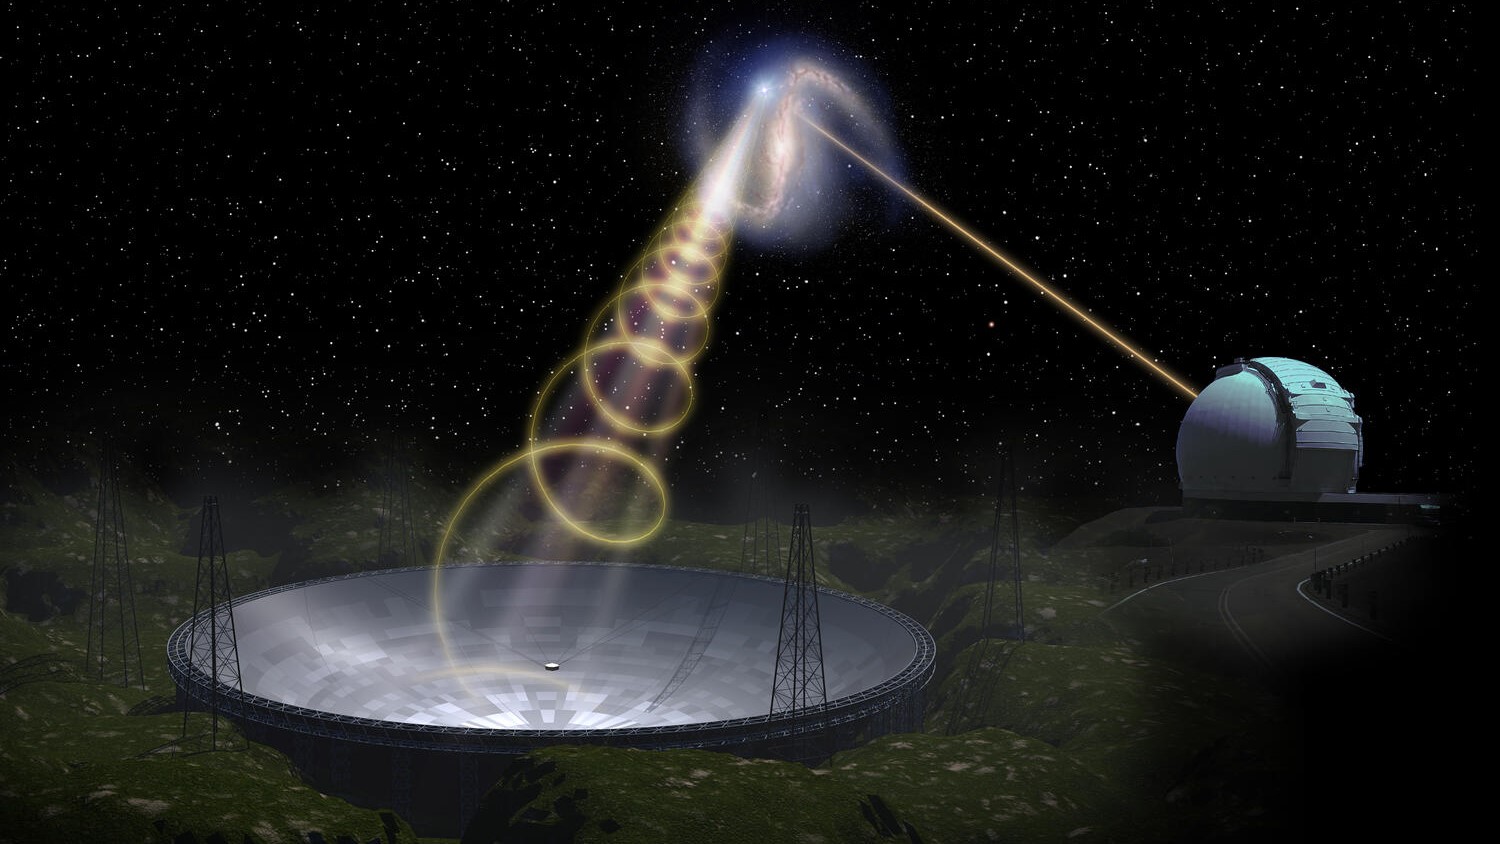 illustration of a telescope dish with spirals emanating from space to the dish, suggesting the signal of a rast radio burst